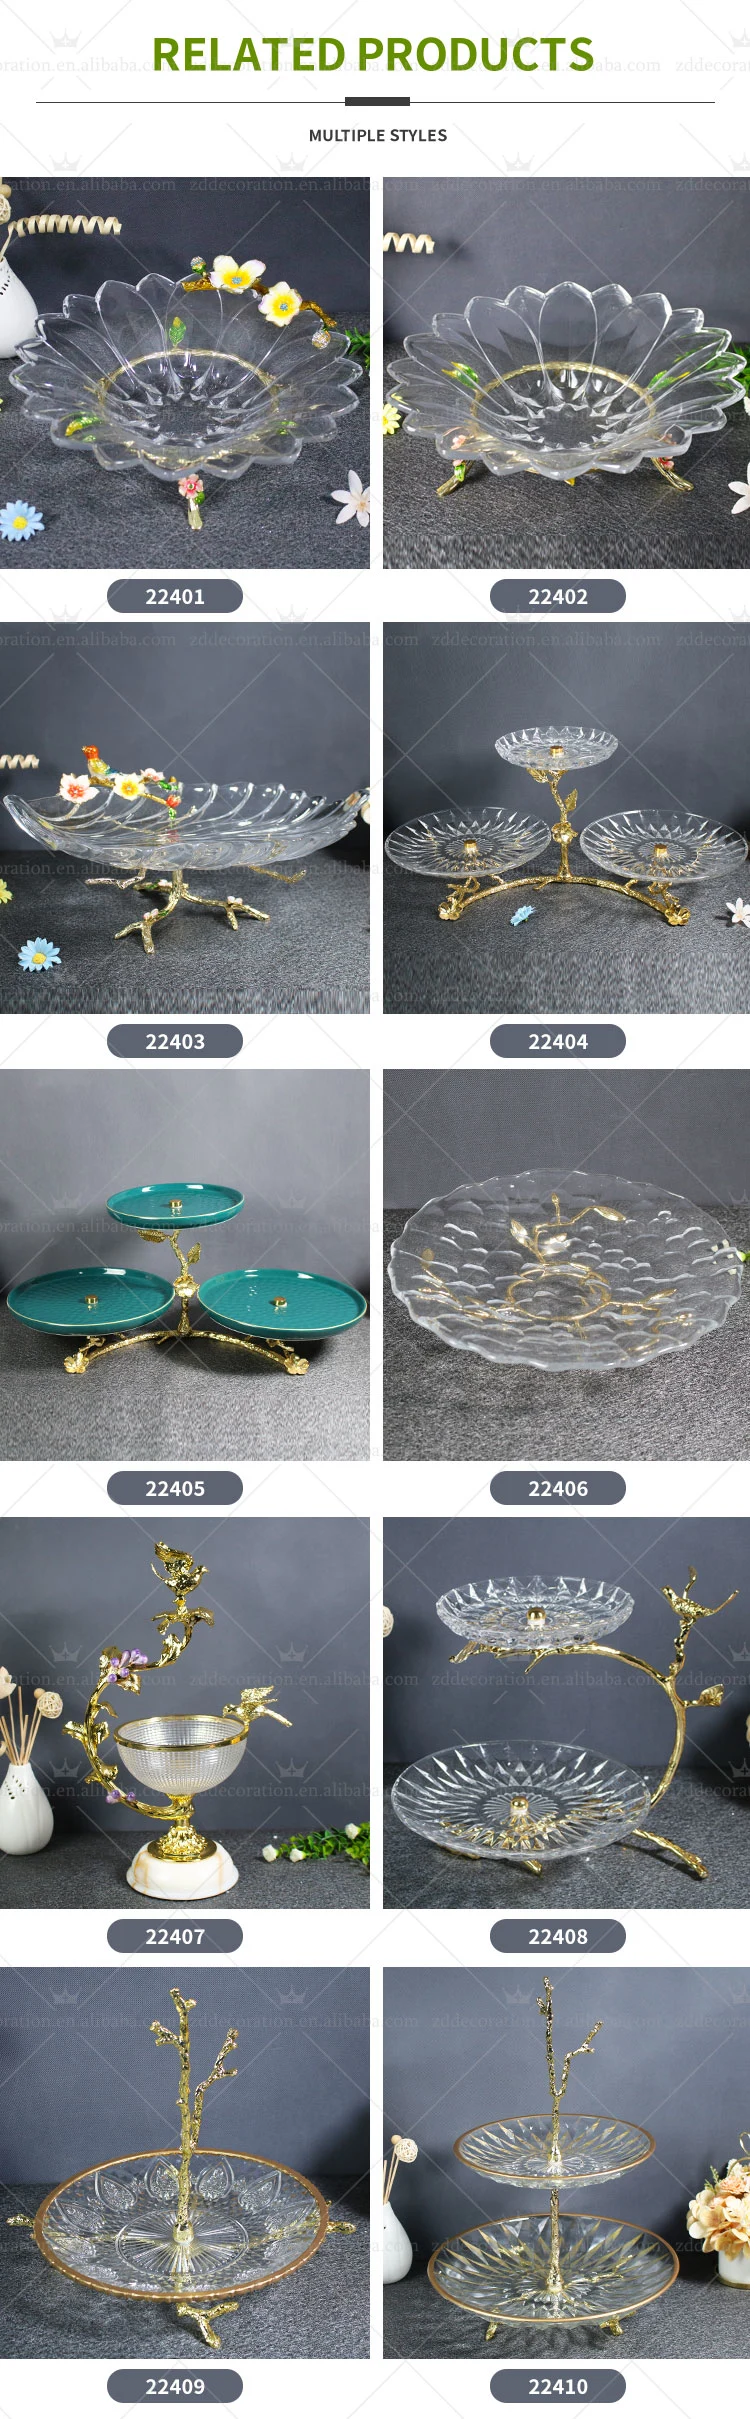 Factory Direct Multi Layer Fruit Plate Dessert Tray Bowl Sets Hotel Nuts Plate Glass Dried Fruit Plate